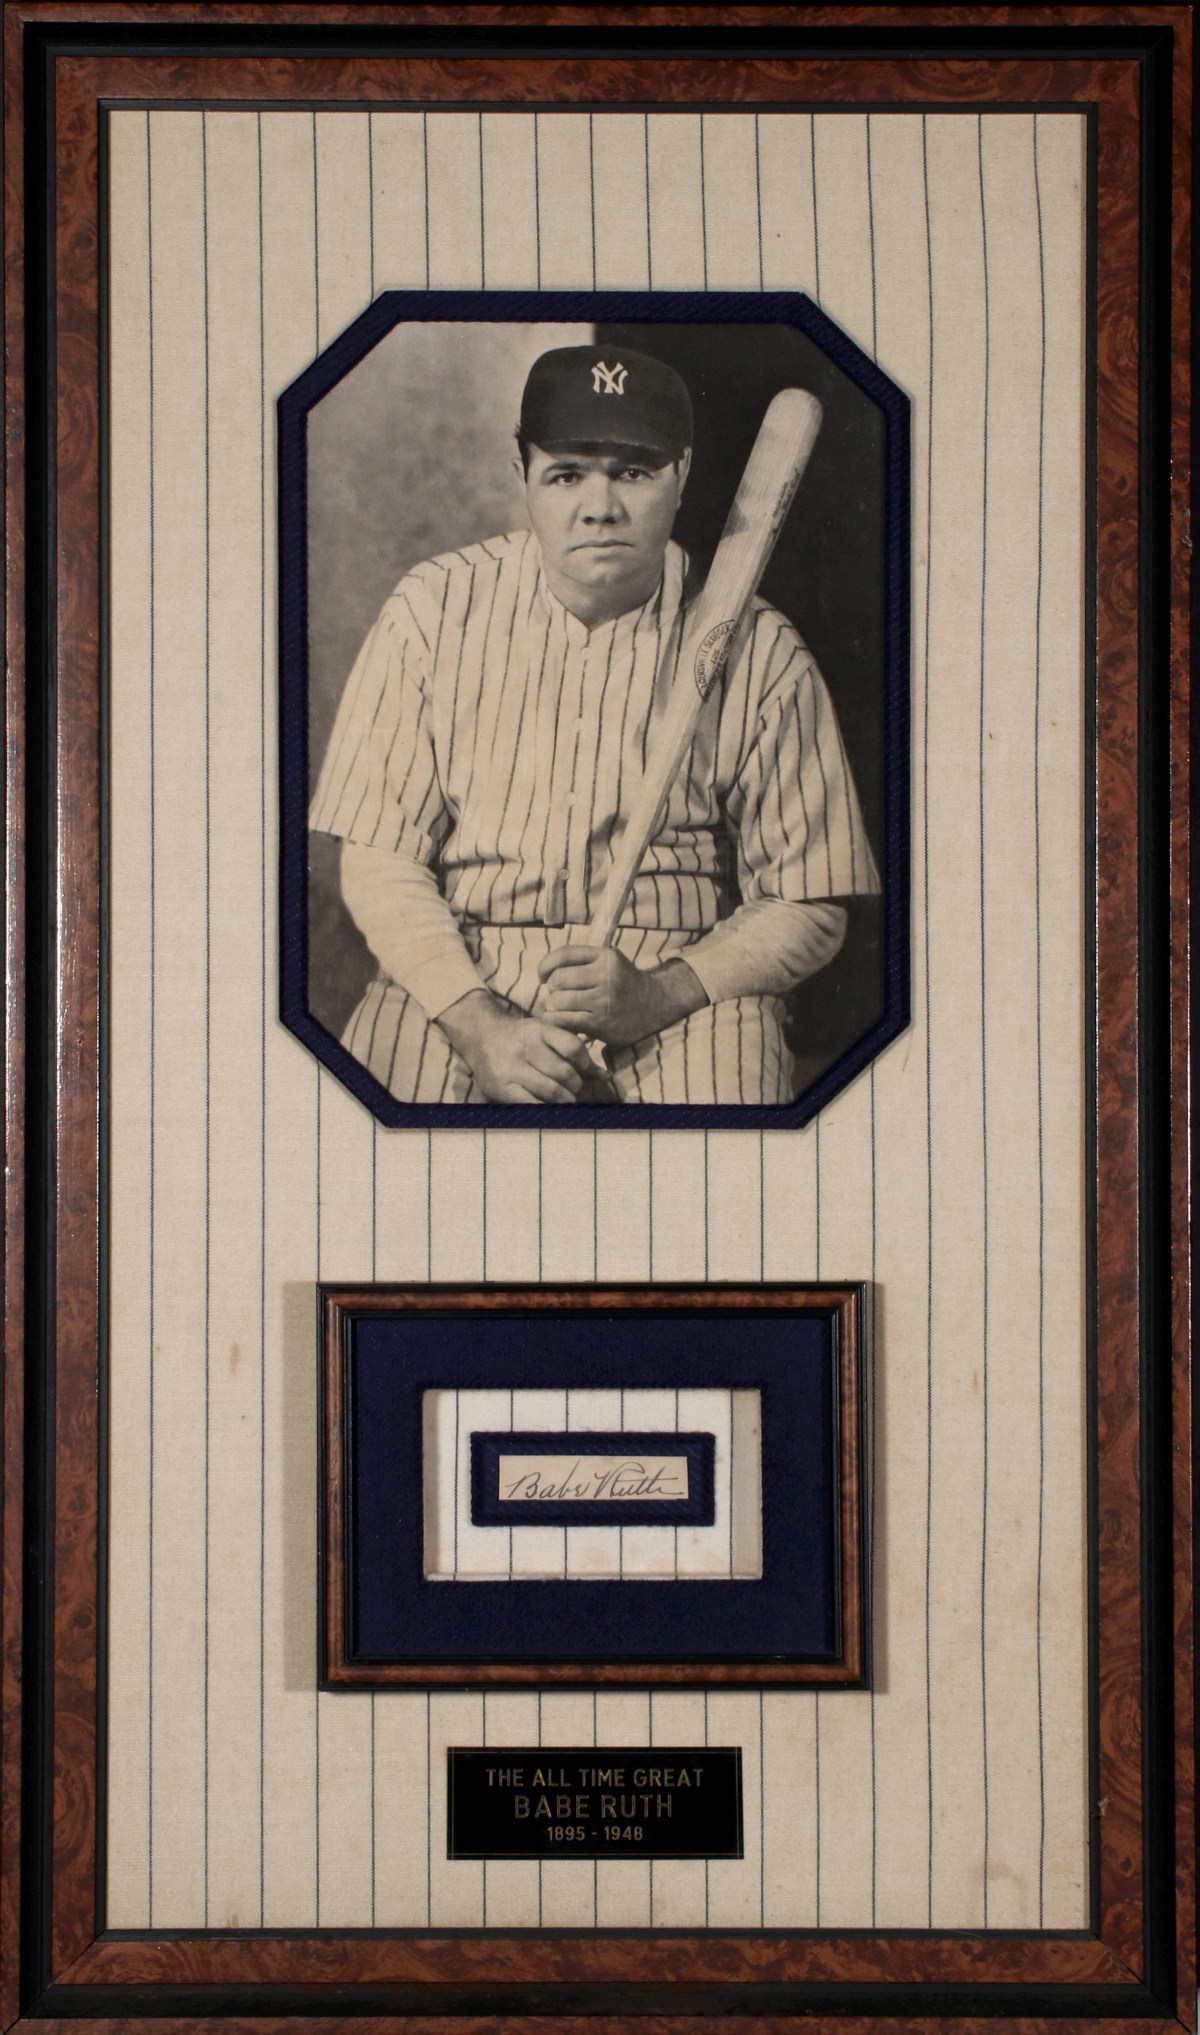 BABE RUTH FRAMED PHOTO AND AUTOGRAPH CLIP